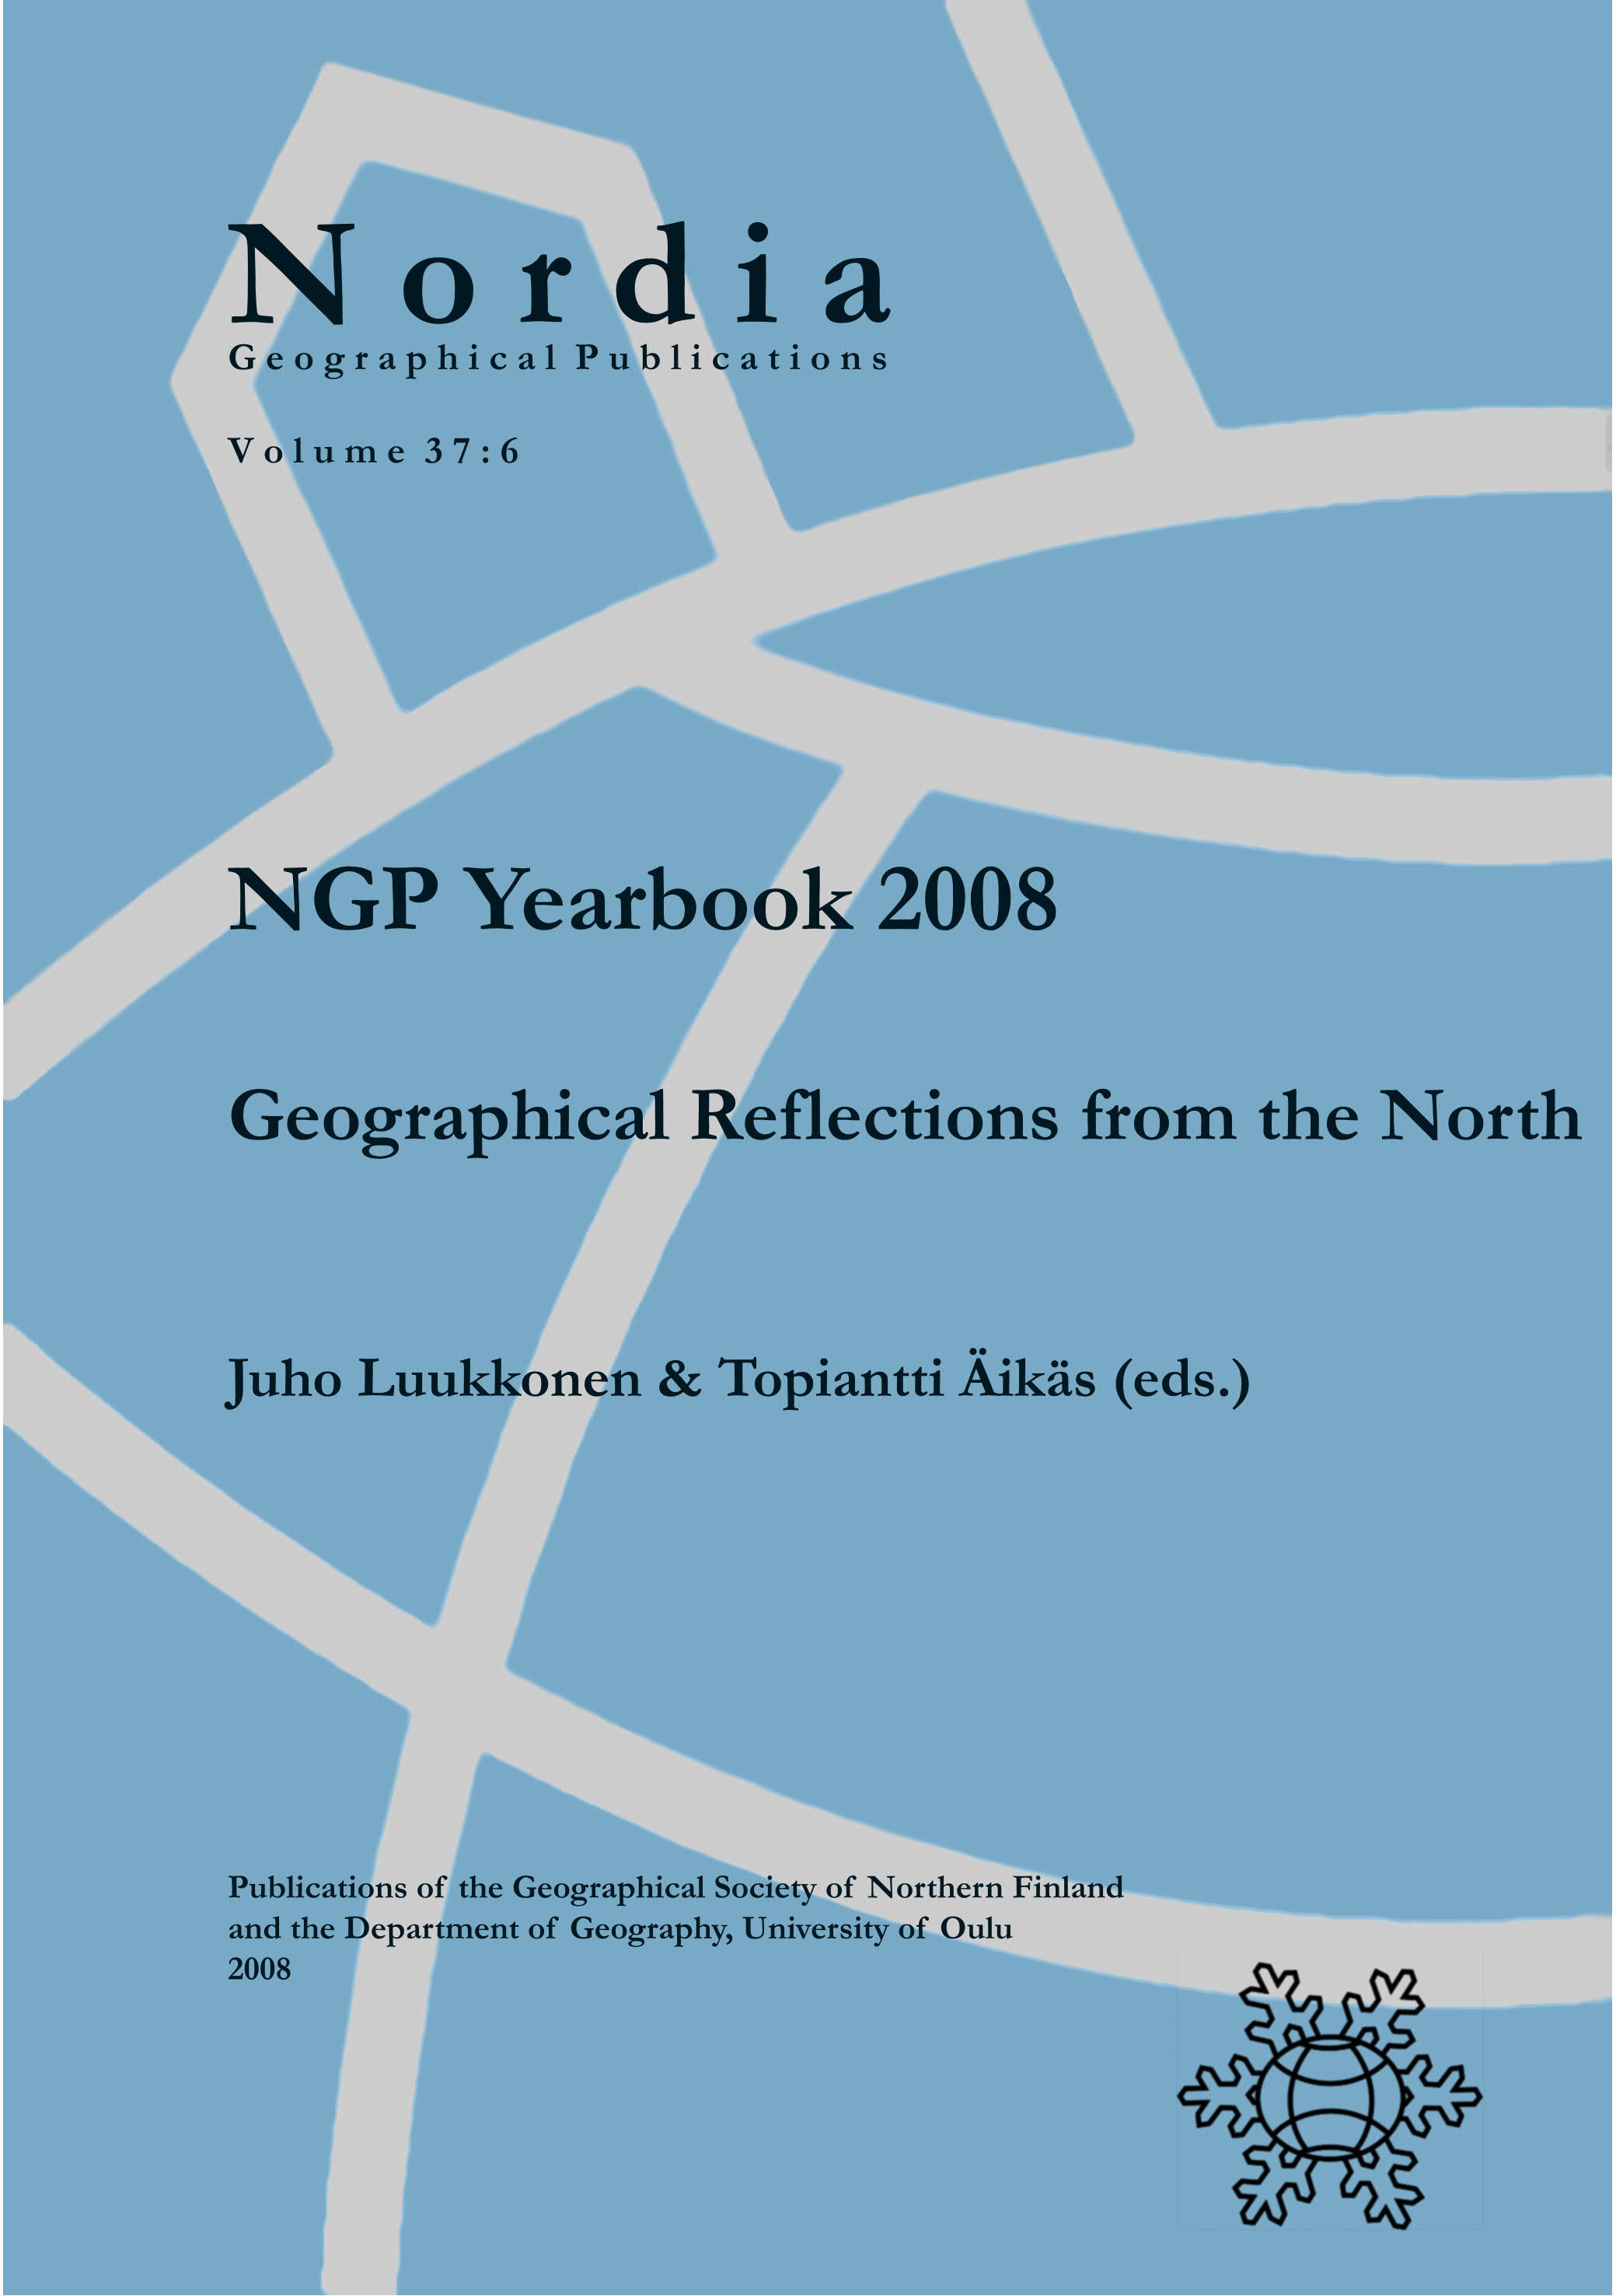 					Näytä Vol 37 Nro 6: NGP Yearbook 2008: Geographical Reflections from the North
				